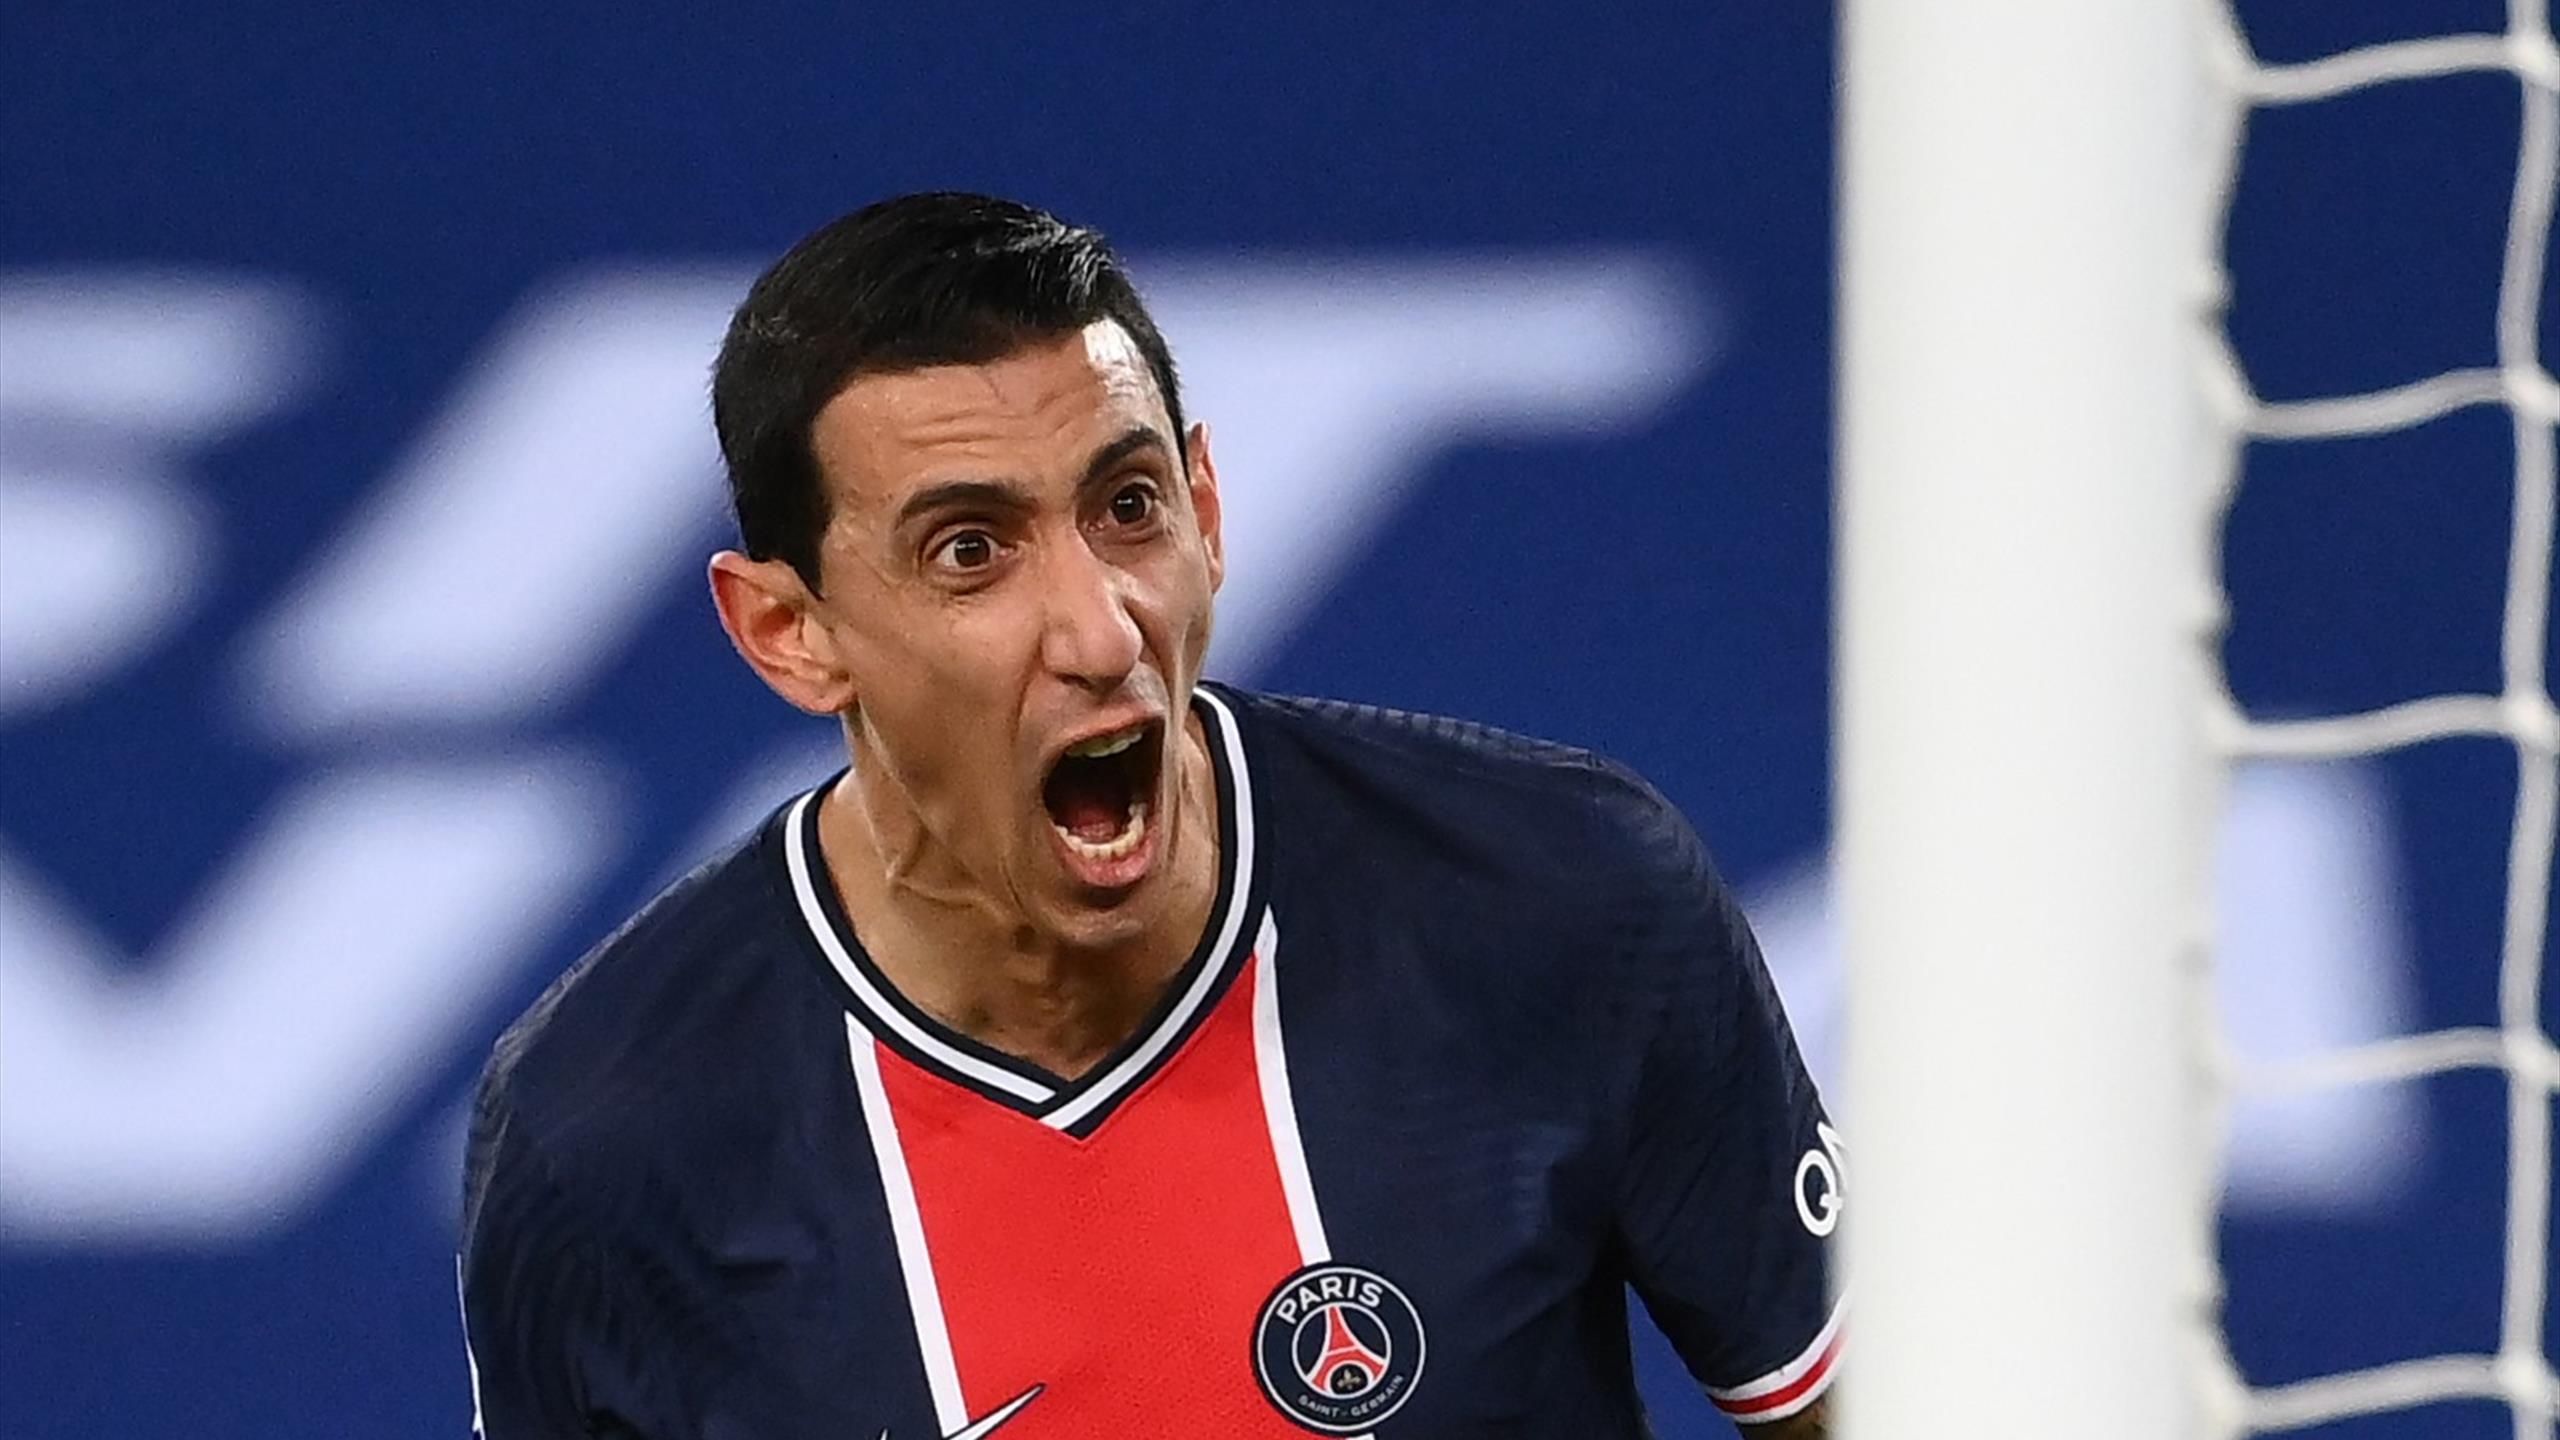 Angel Di Maria Signs New Contract At Ligue 1 Champions Paris Saint Germain, Commits To 2022